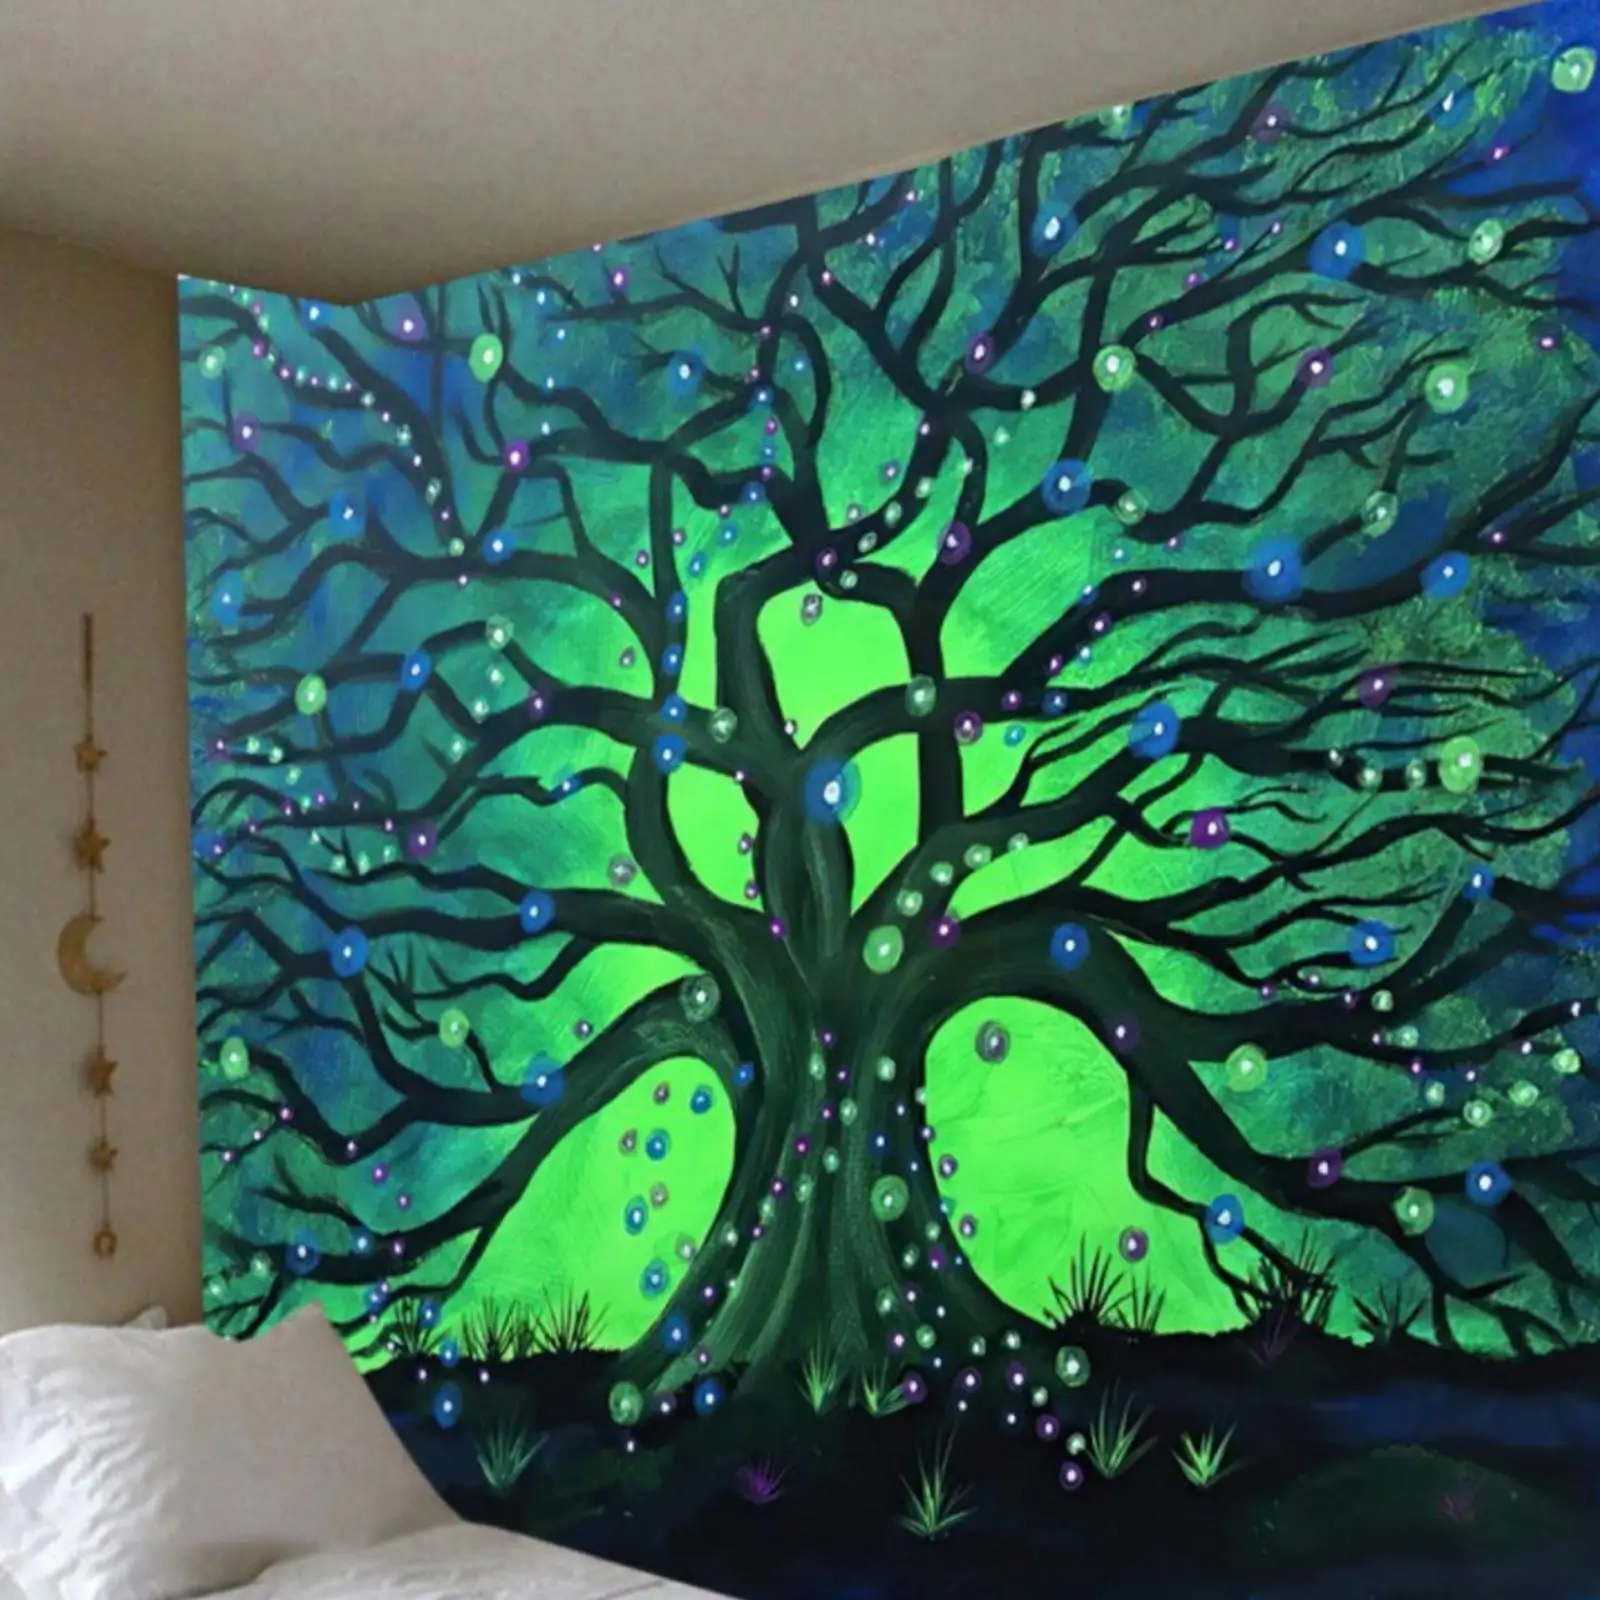 

Fairytale Dreamy Tree Tapestry Psychedelic 3d Carpet Decor Room Kids Bohemian Hippie Decor Home Witchcraft E1r7